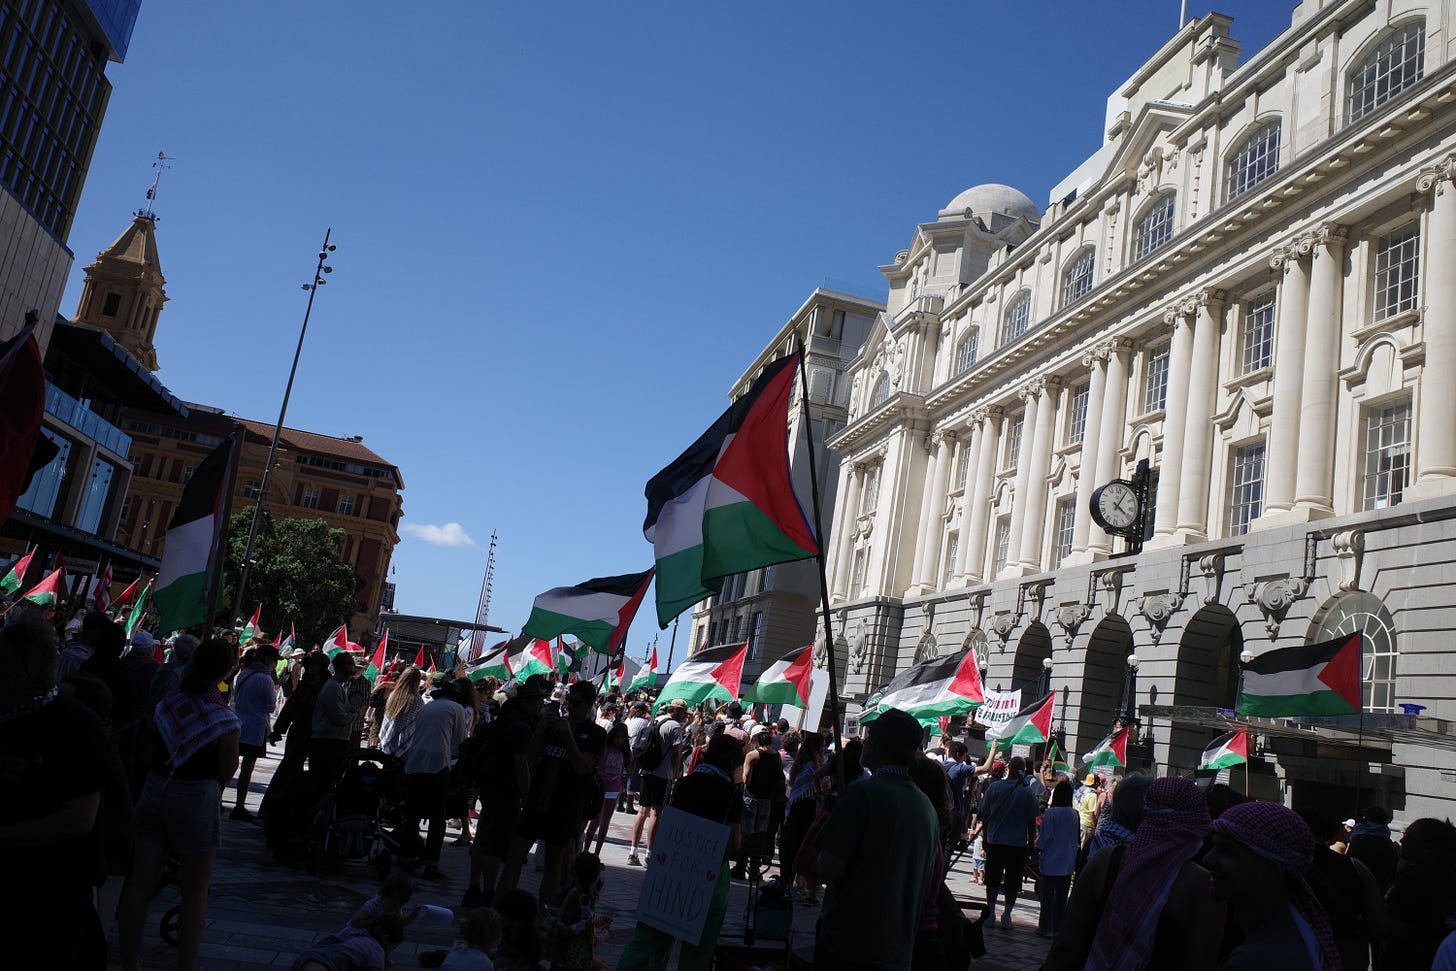 Another day at the Palestine march, with lots of people holding flags